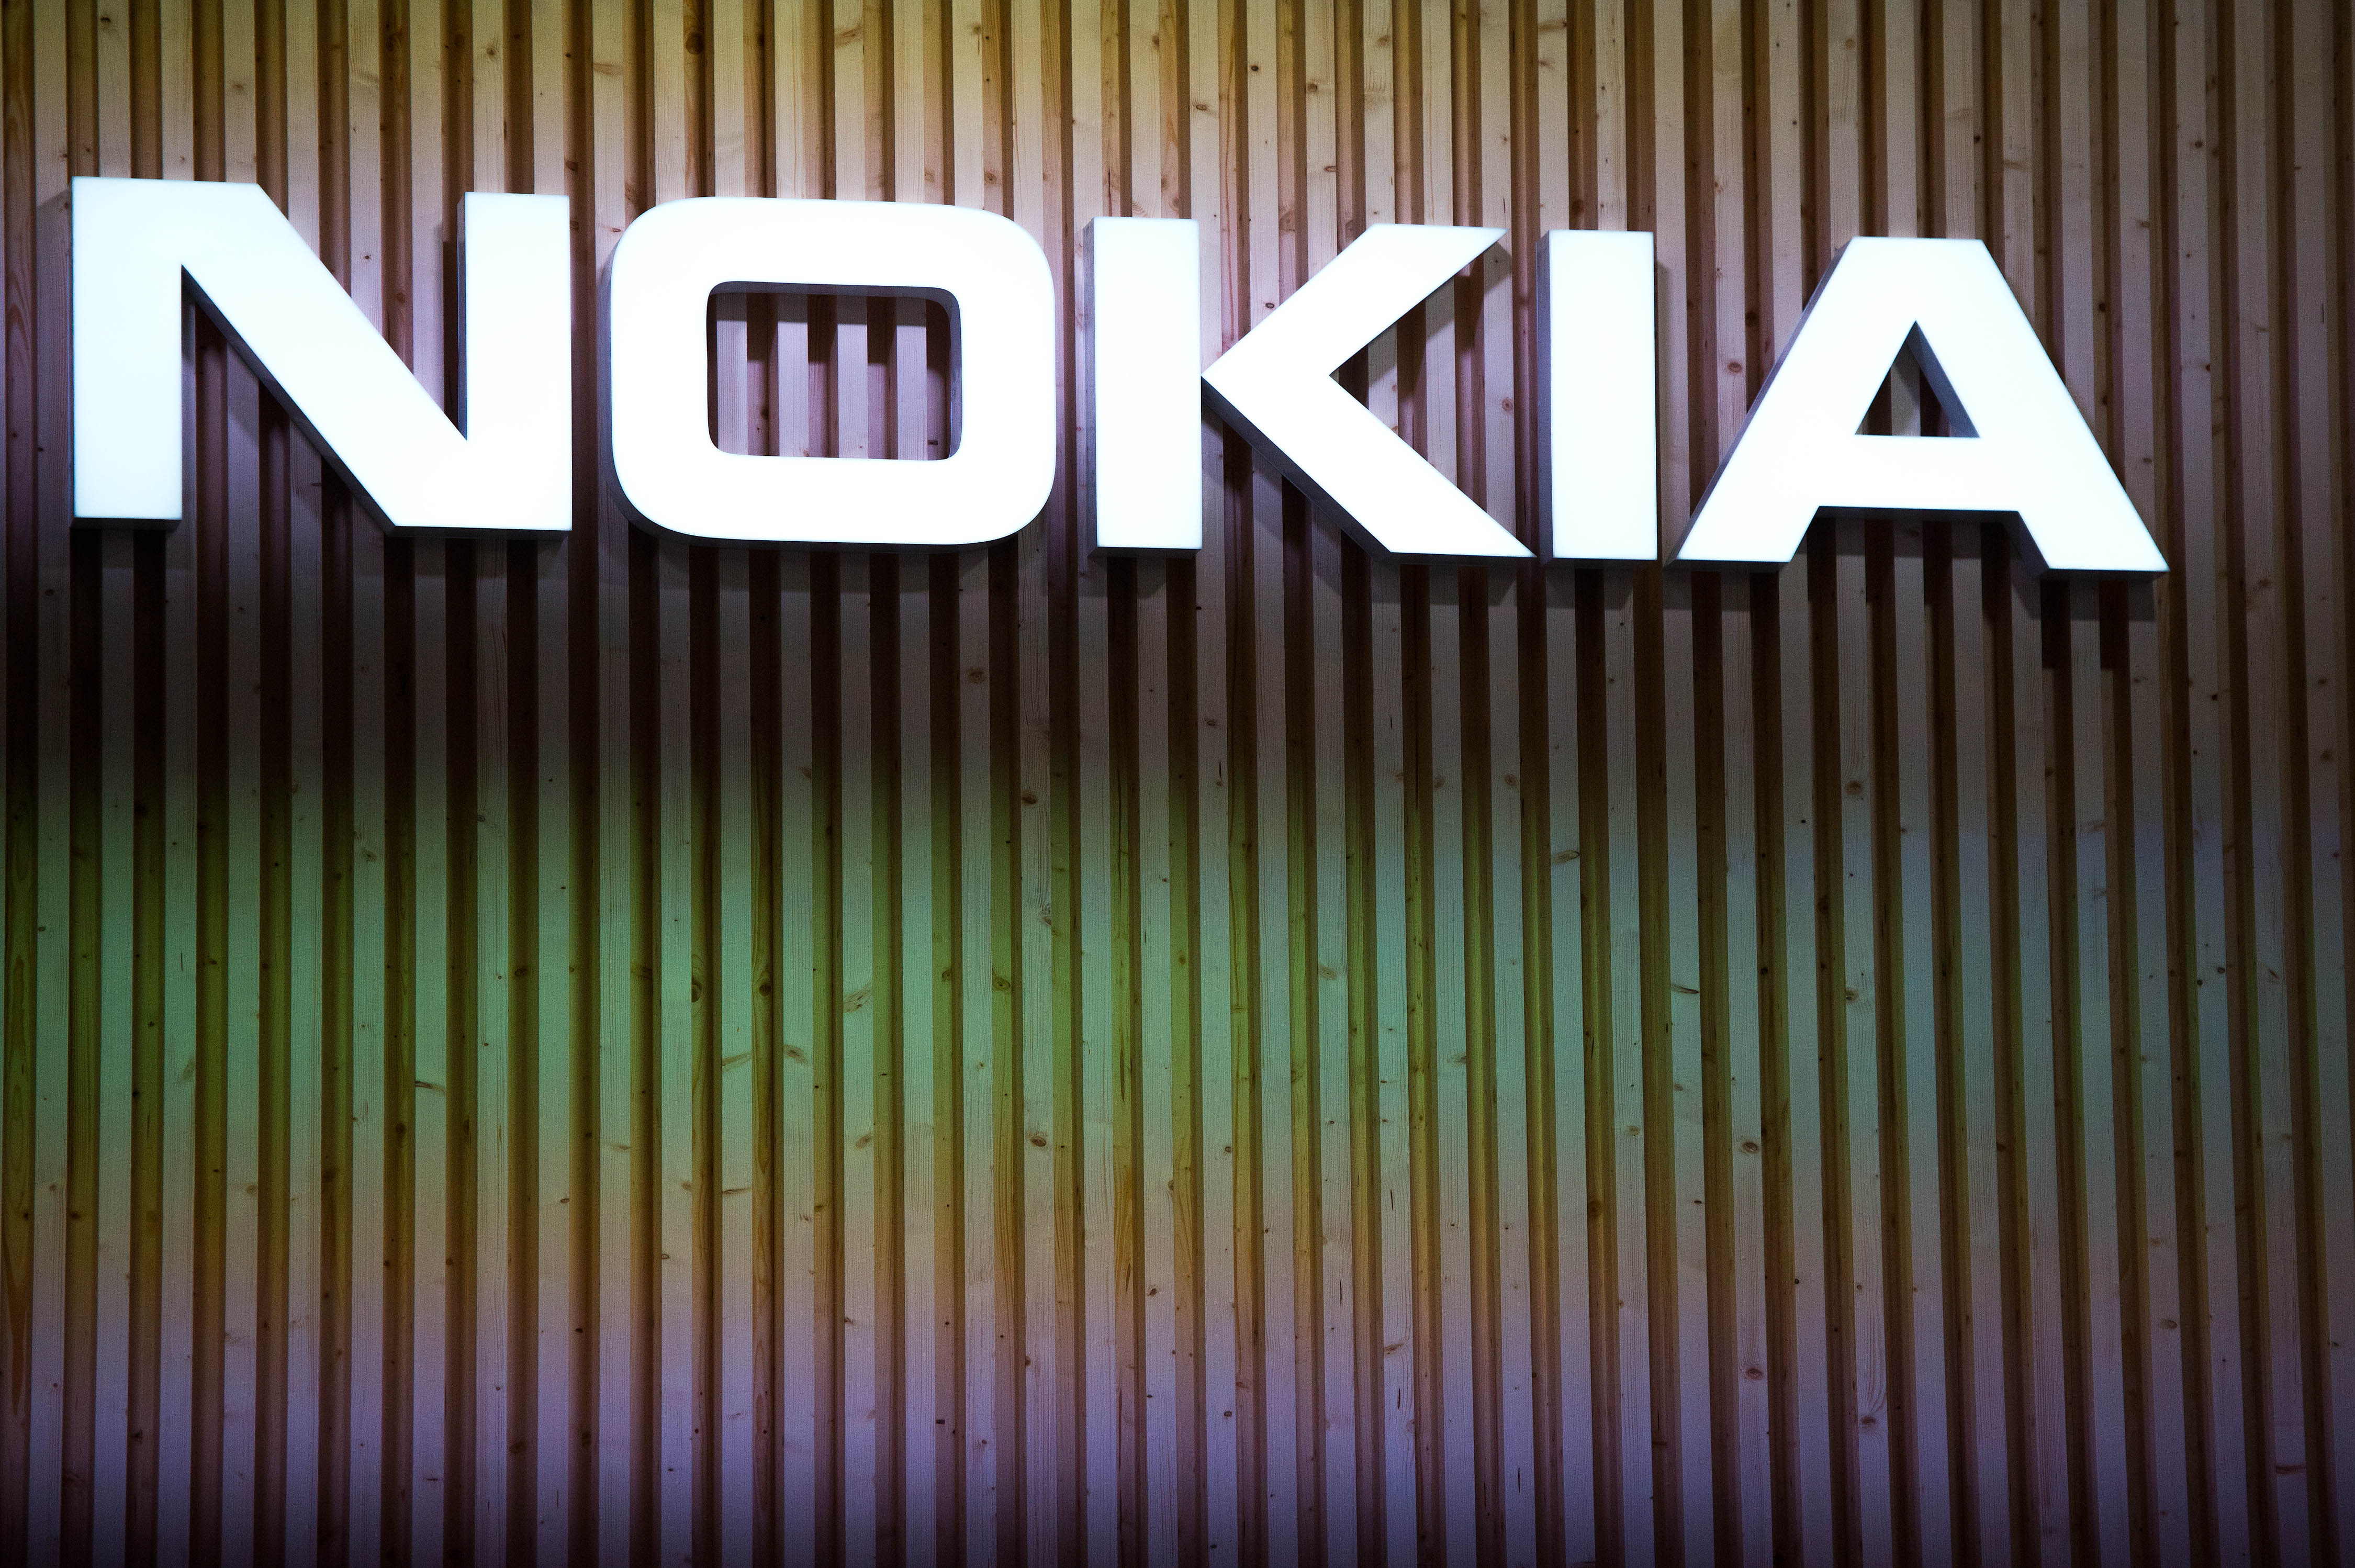 Nokia is buying Alcatel-Lucent for $16.6 billion